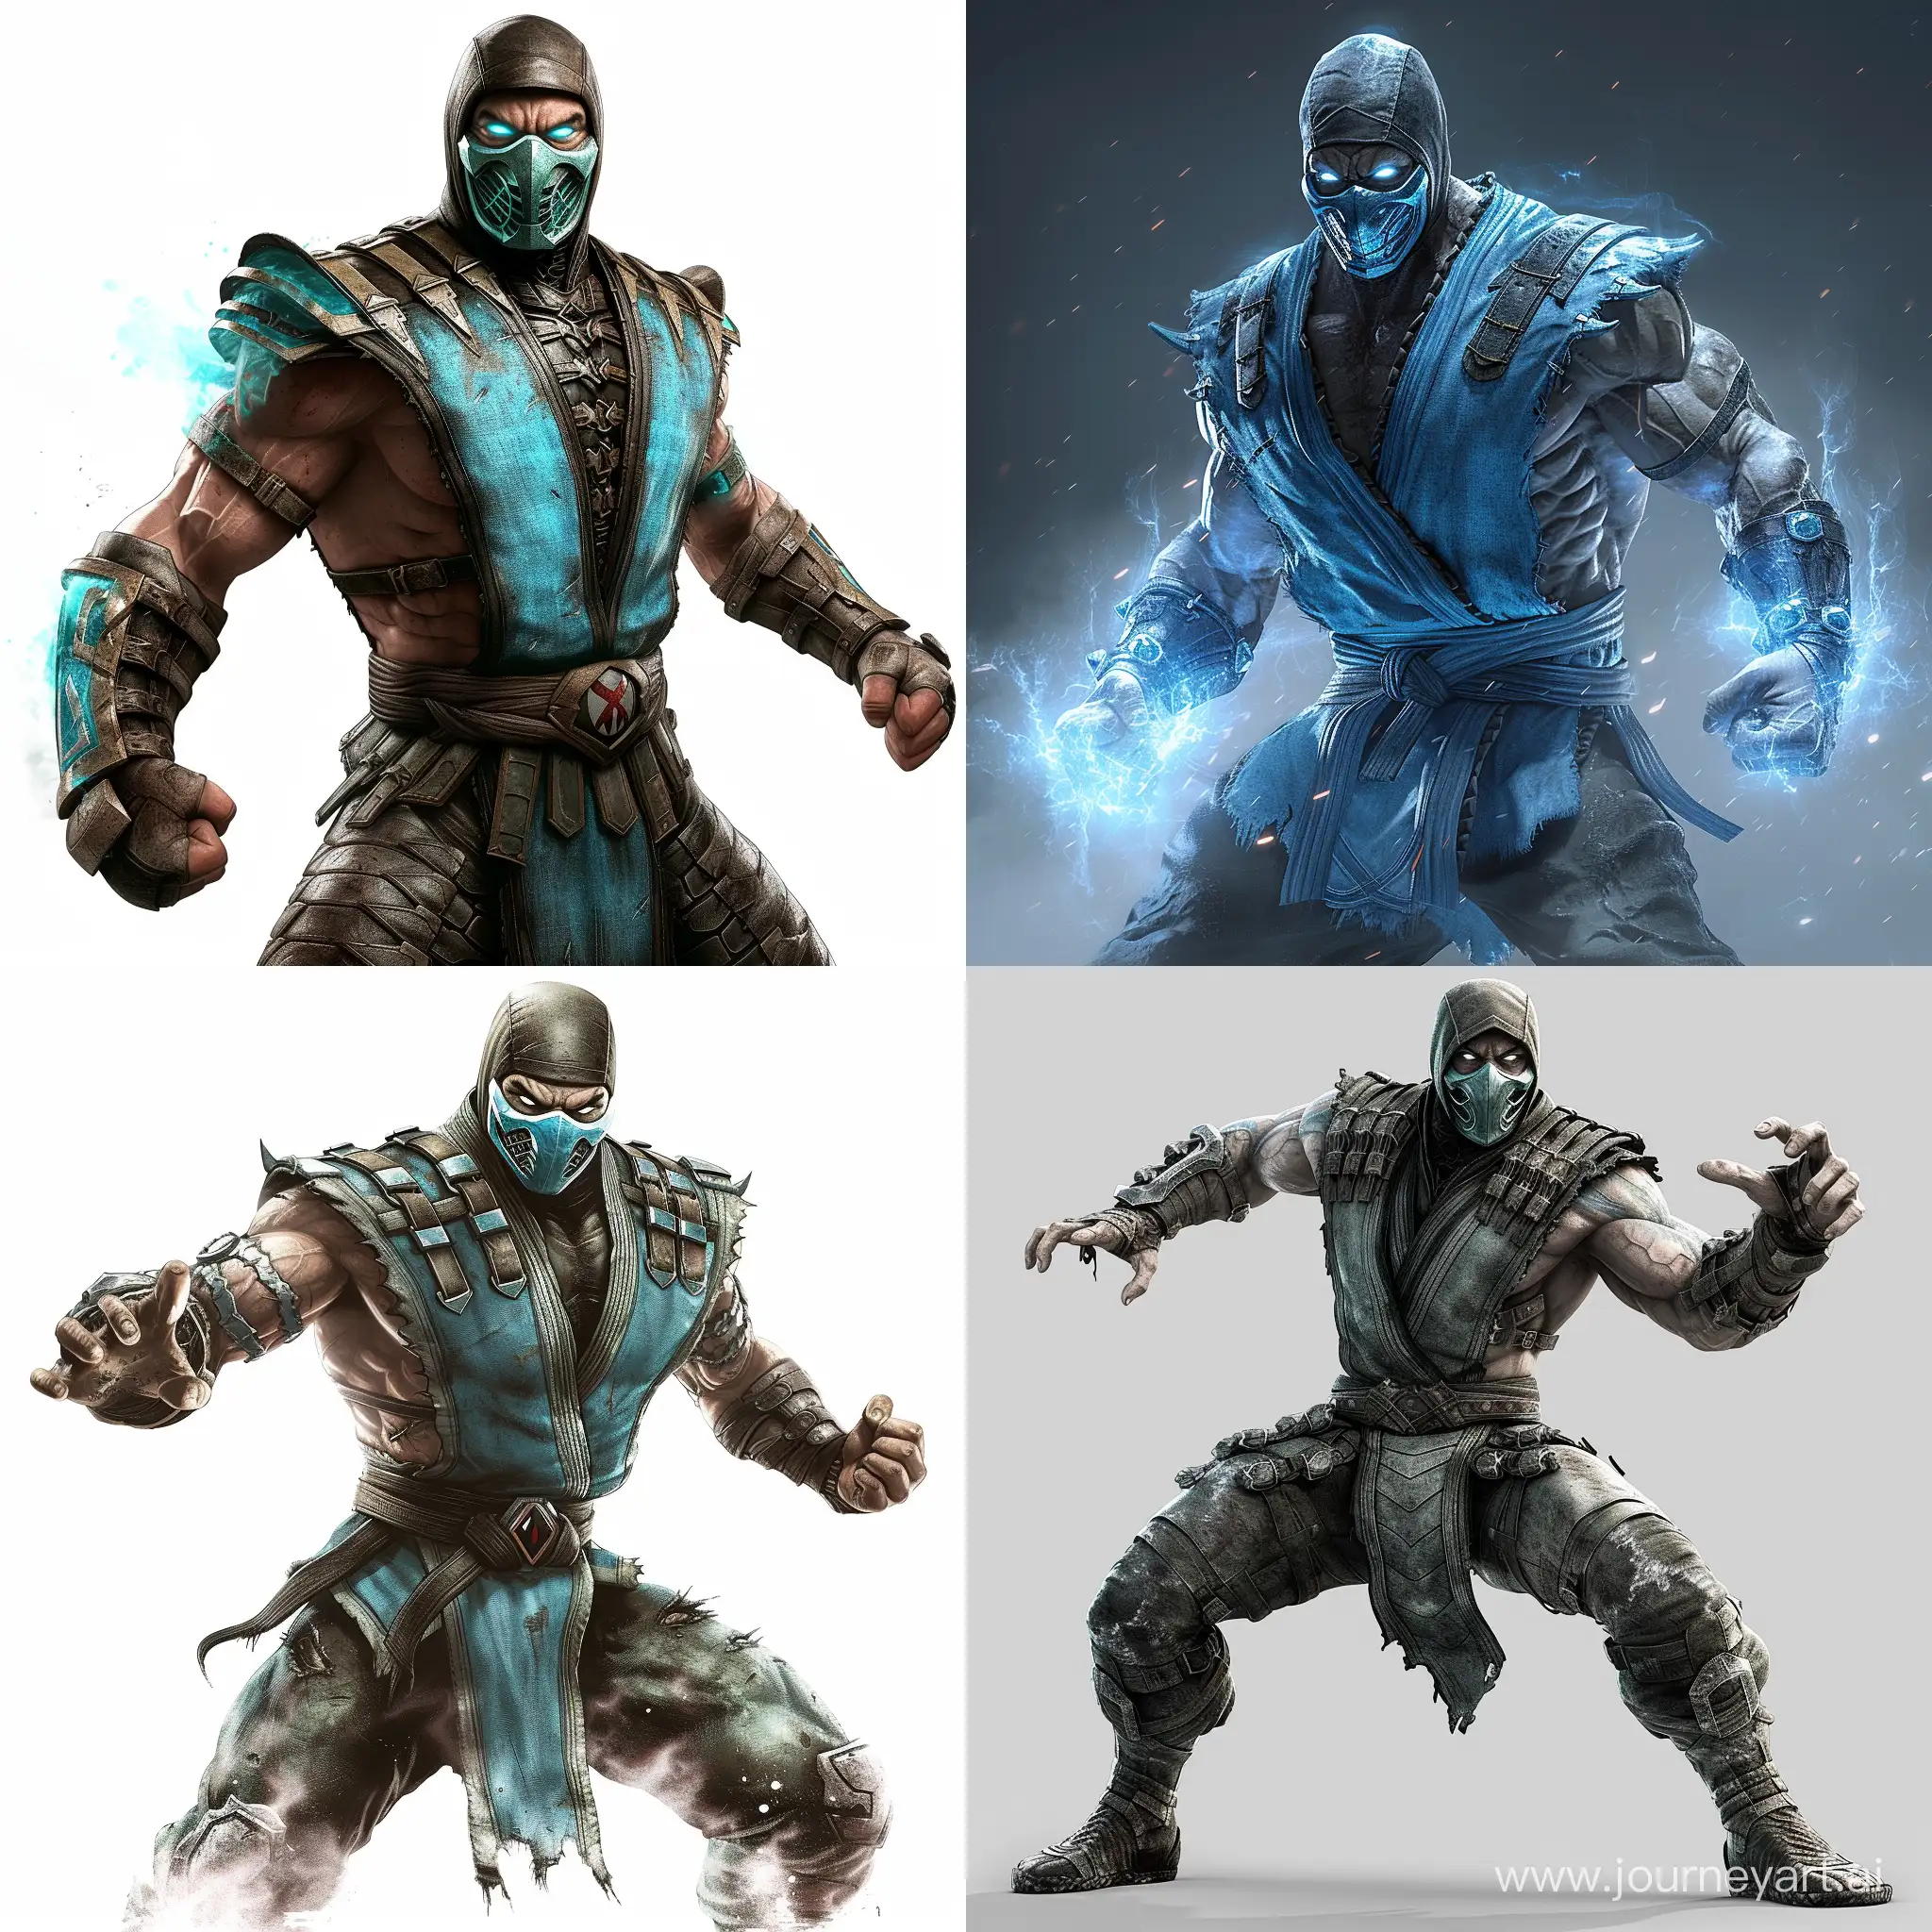 SUB-ZERO, MORTAL KOMBAT, 
IN FULL HEIGHT, IN A FIGHTING STANCE
